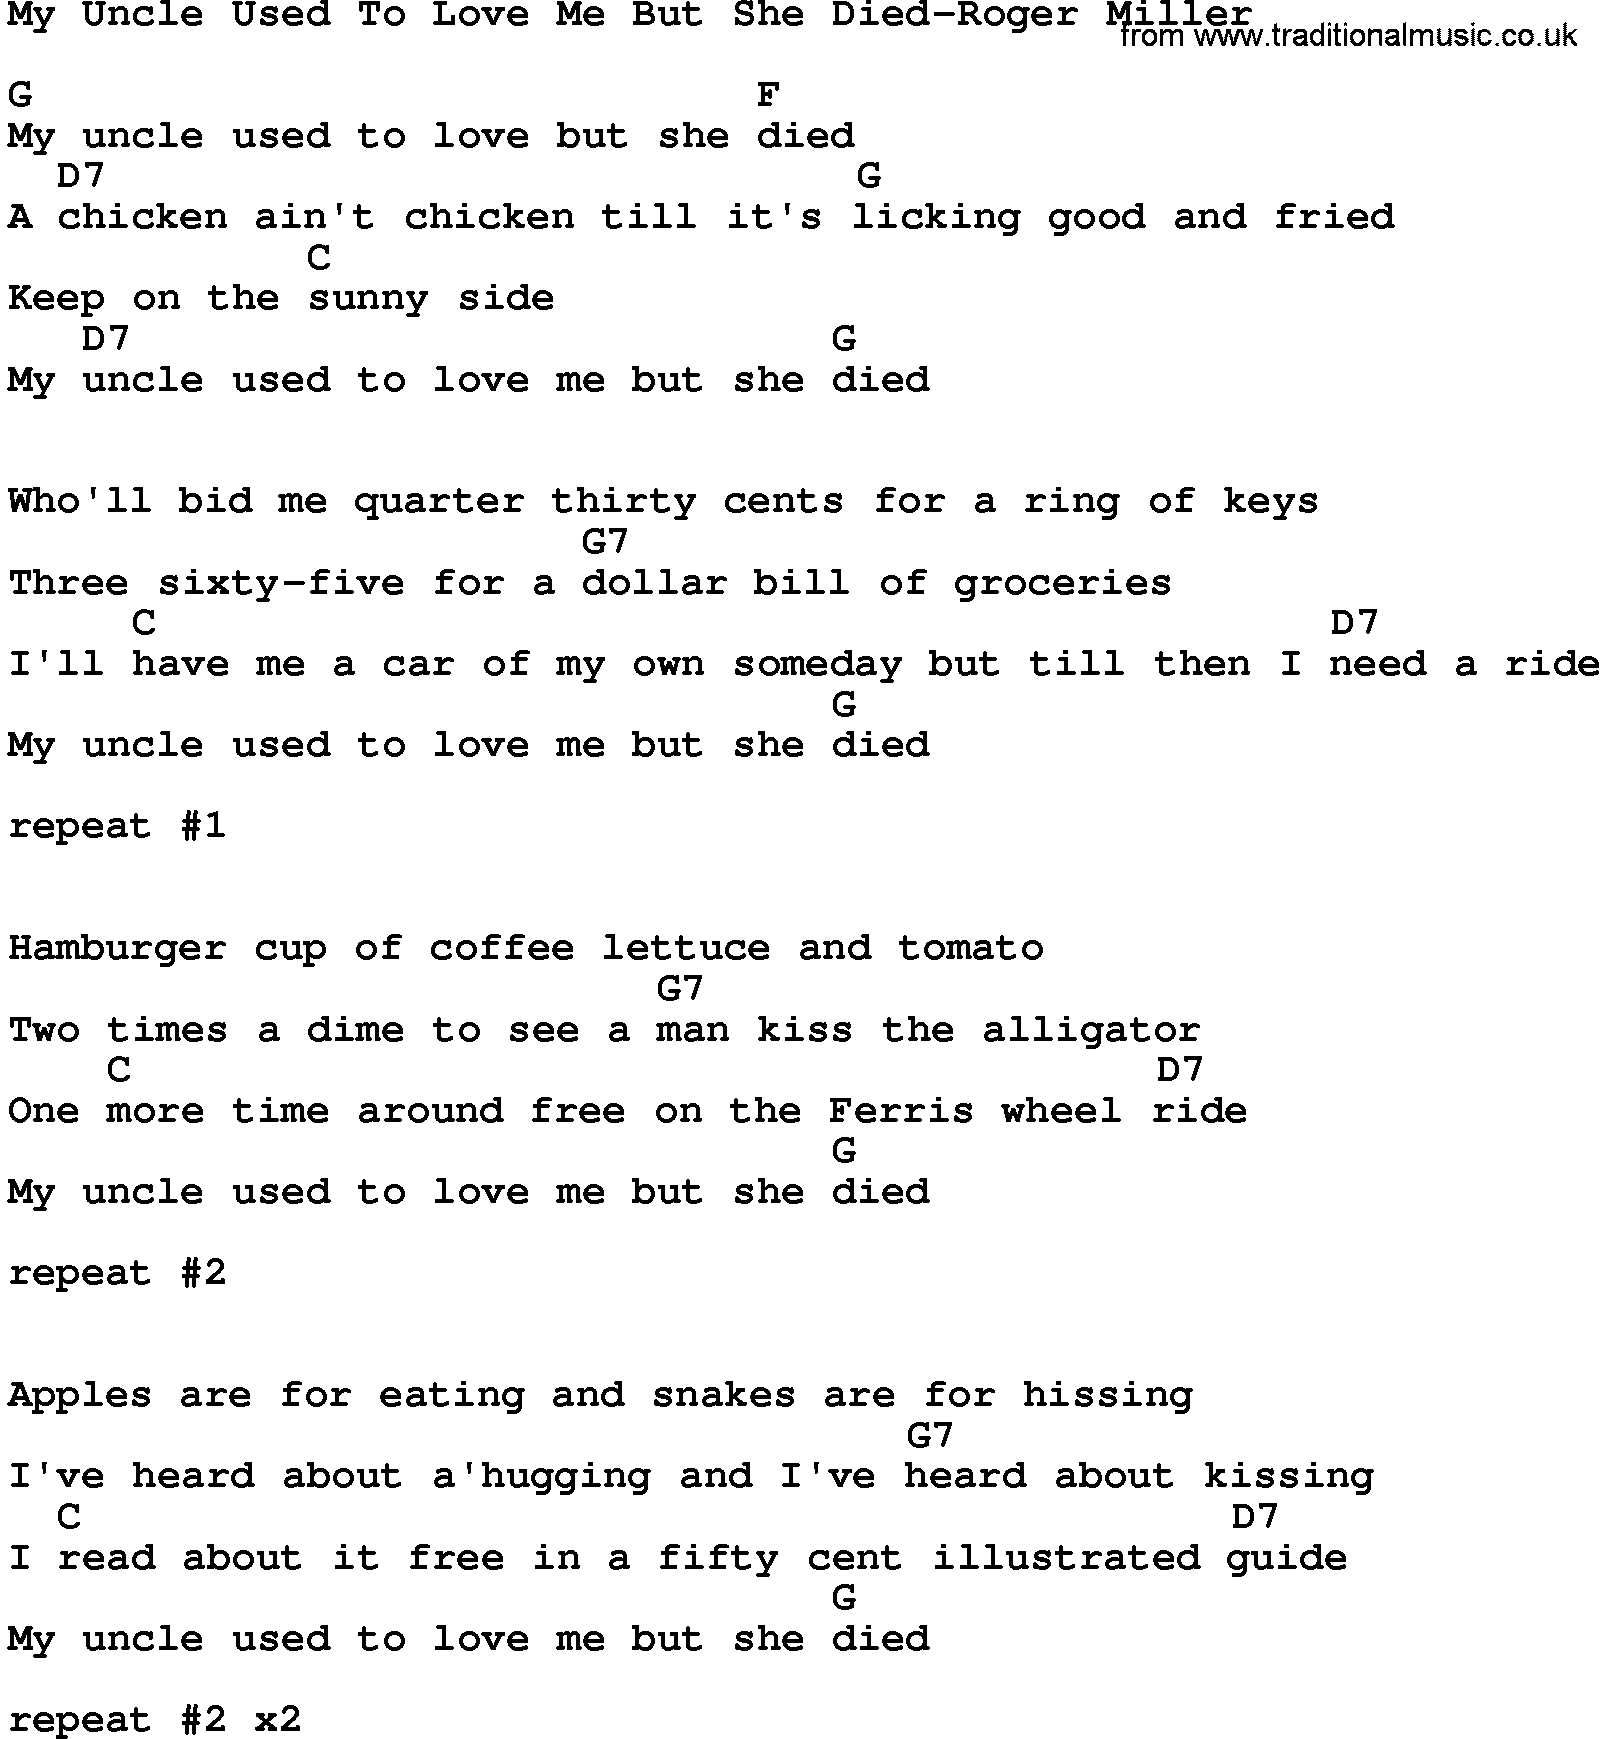 Country music song: My Uncle Used To Love Me But She Died-Roger Miller lyrics and chords